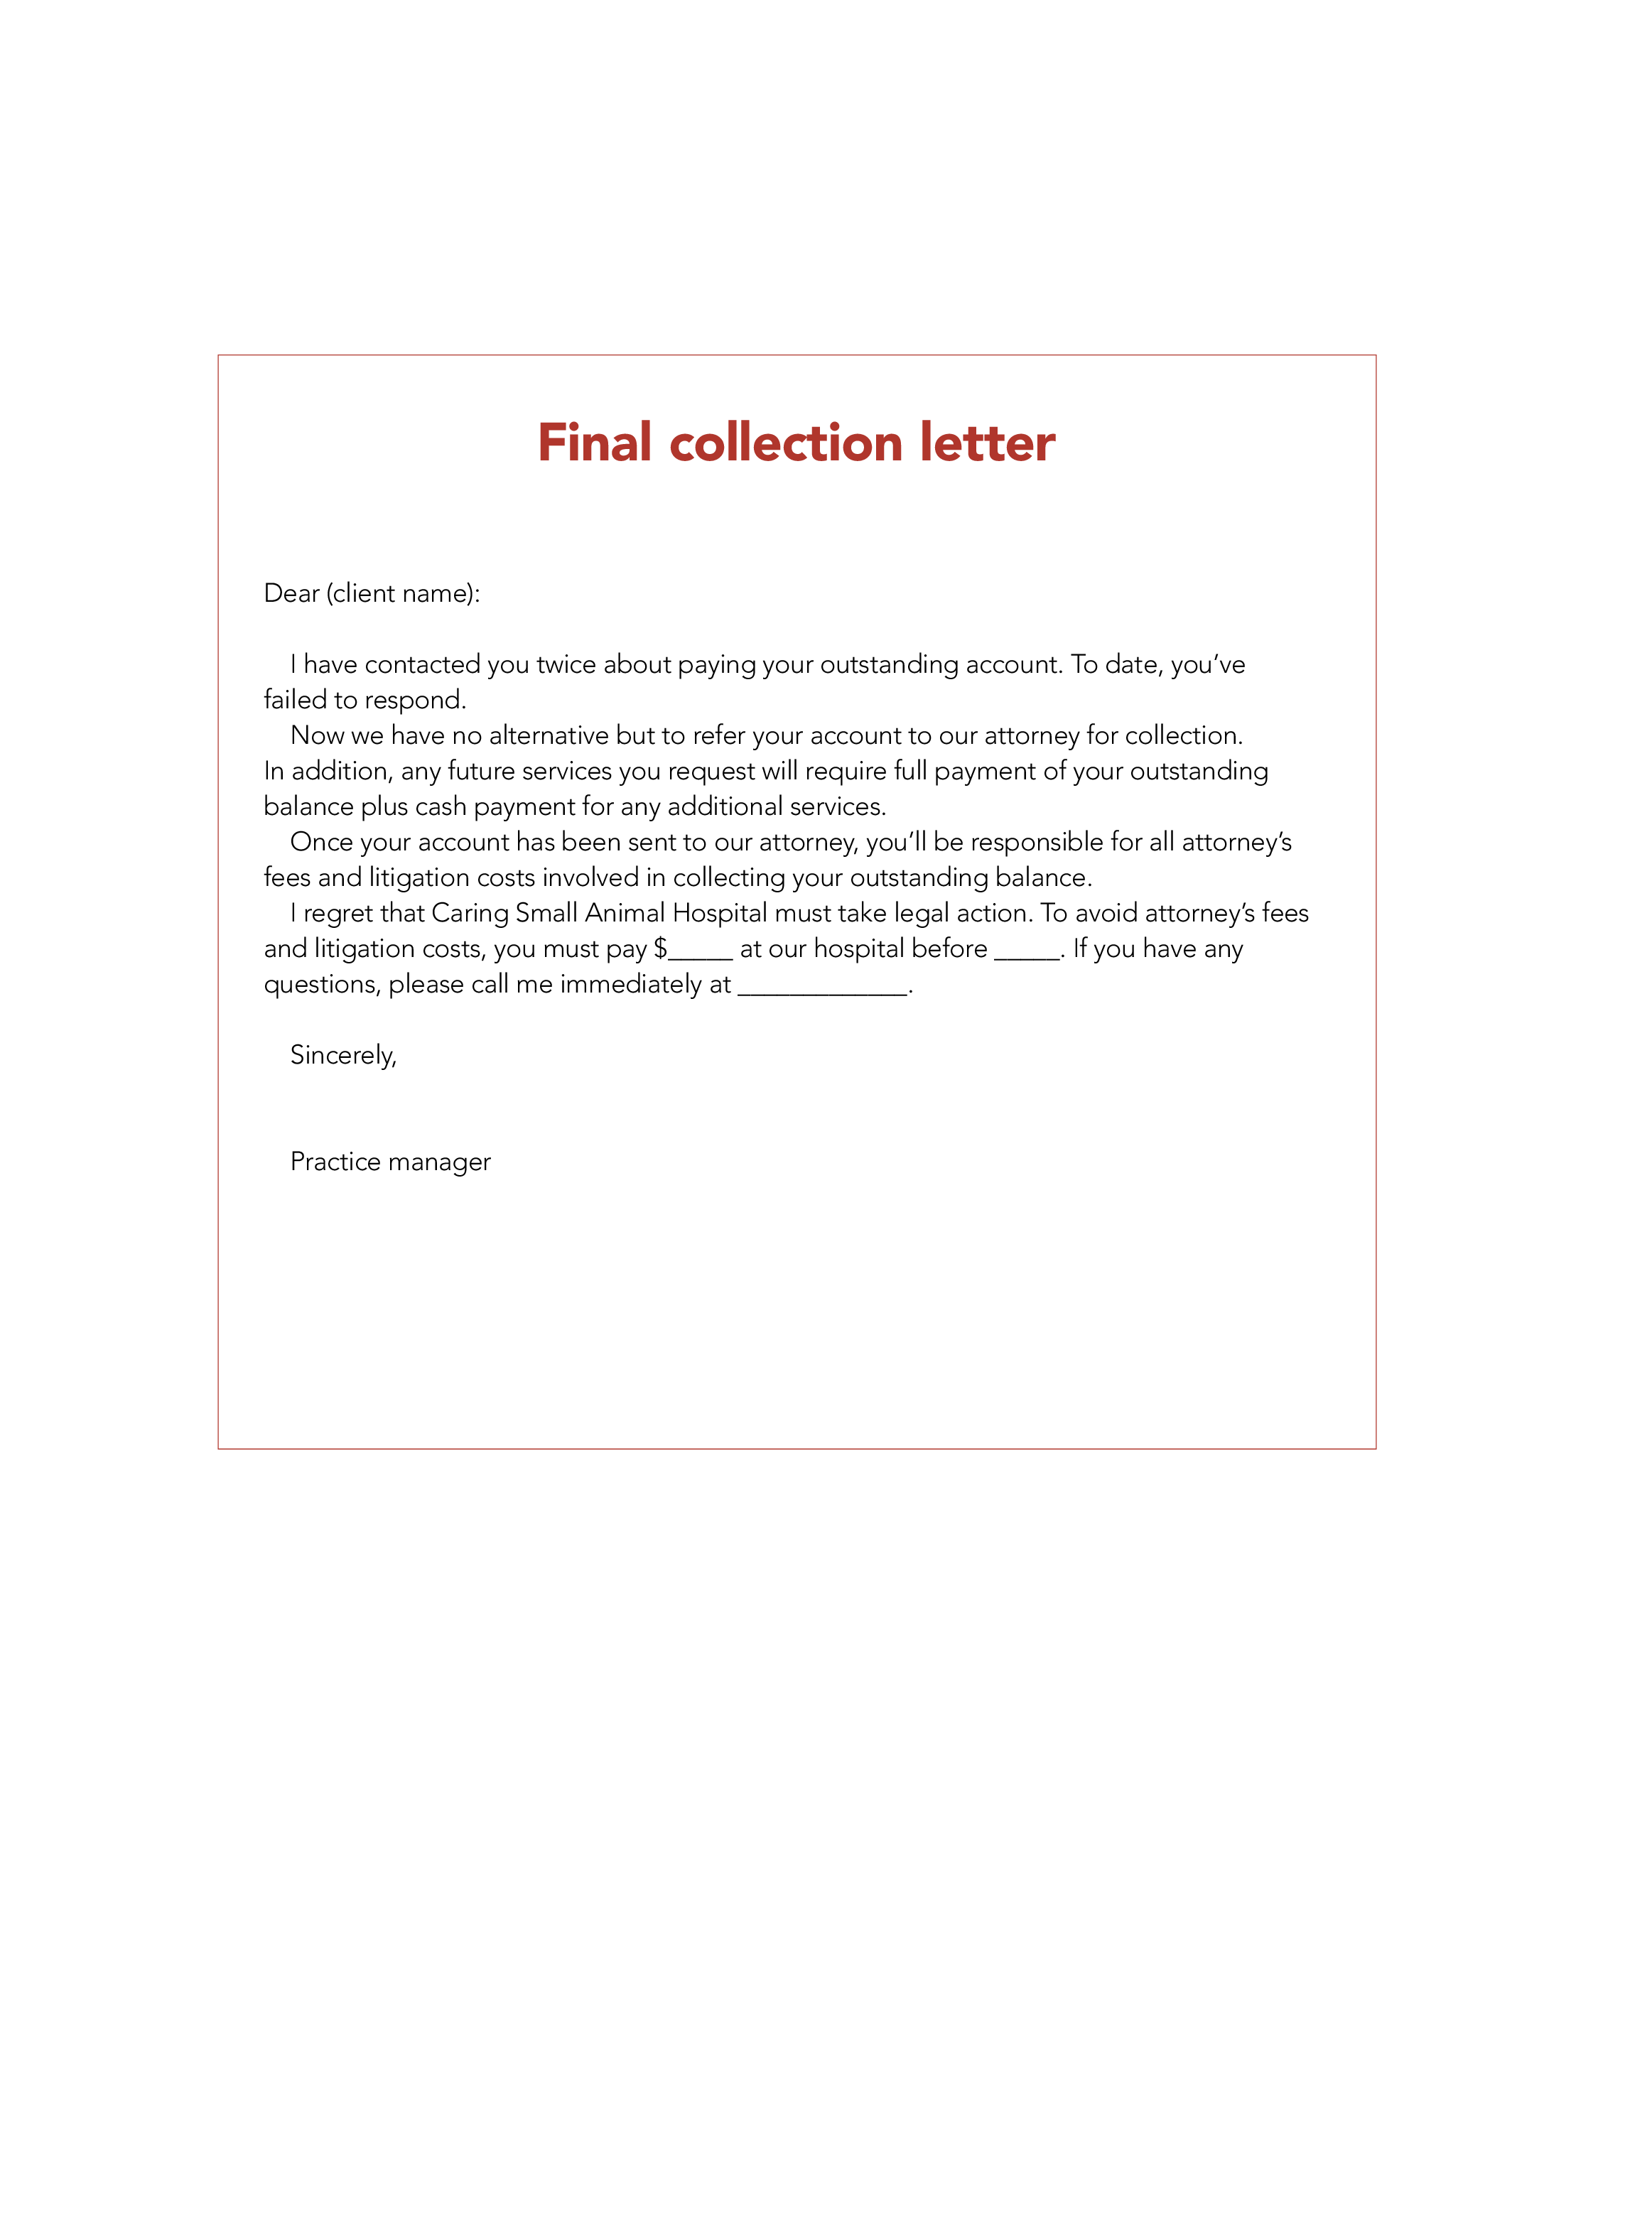 final collection letter template